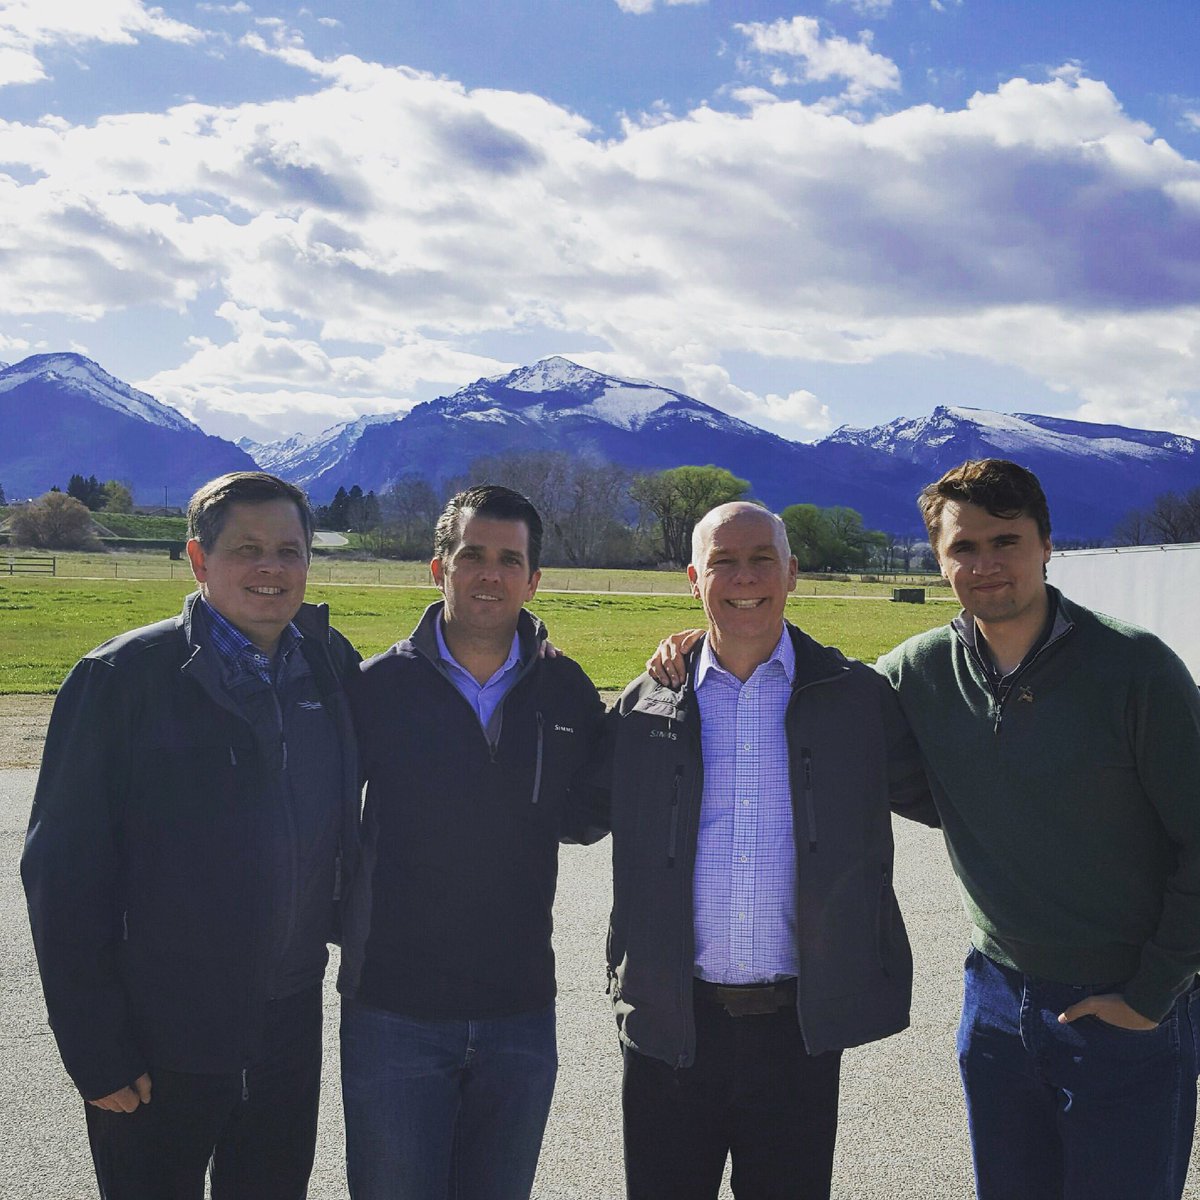 Awesome campaigning today in Montana for my friend Greg Gianforte alongside two amazing people @DonaldJTrumpJr and @SteveDaines ! #MAGA